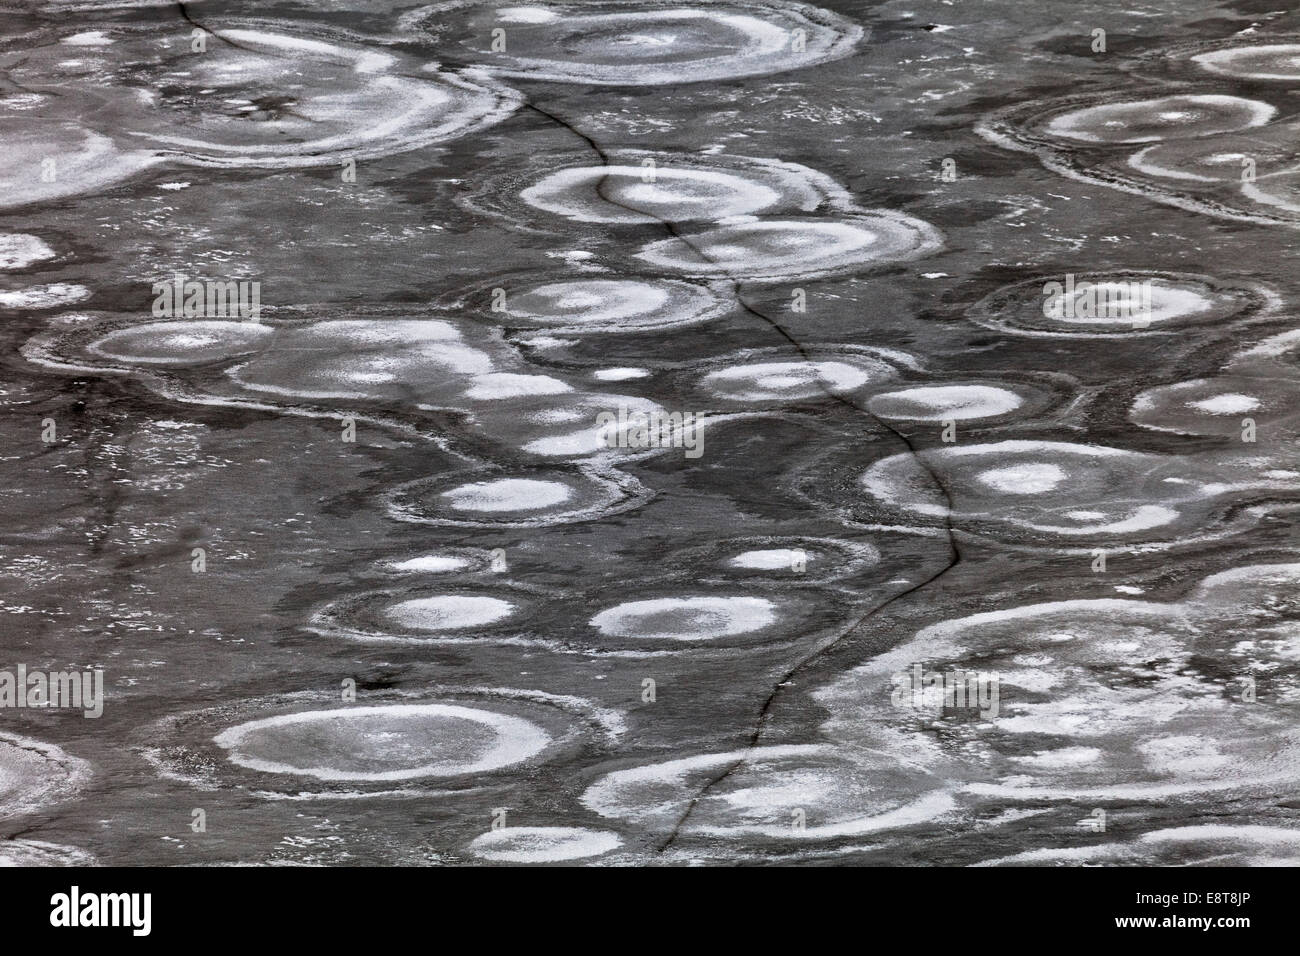 Crack in an ice surface with annular structures, Switzerland Stock Photo